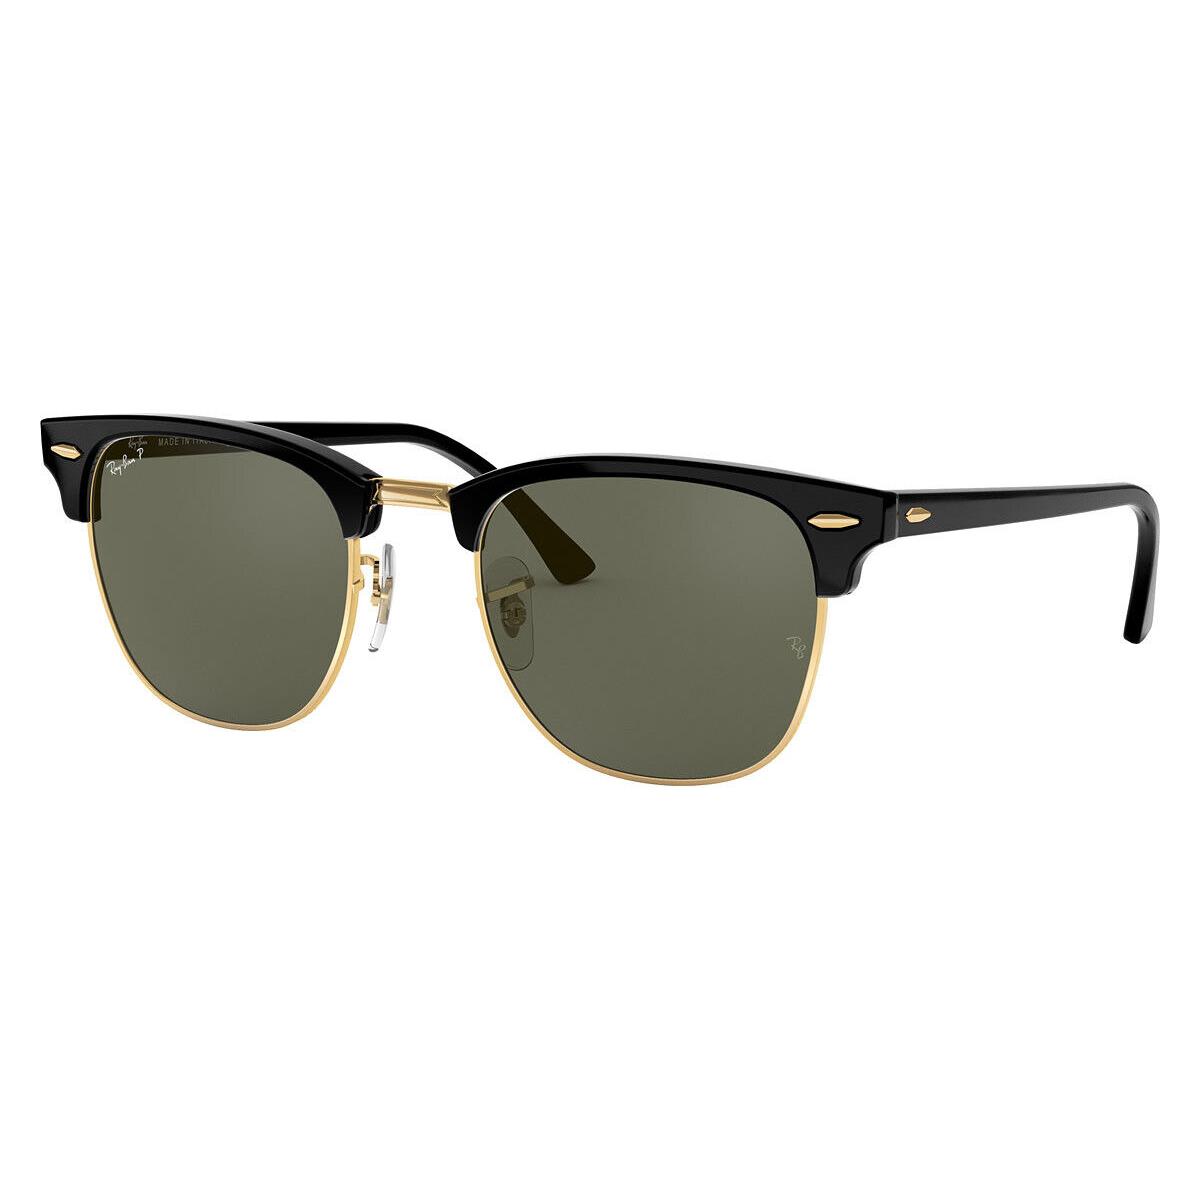 Ray-ban Clubmaster RB3016 Sunglasses Black Green Polarized 55 - Frame: Black / Green Polarized, Lens: Green Polarized